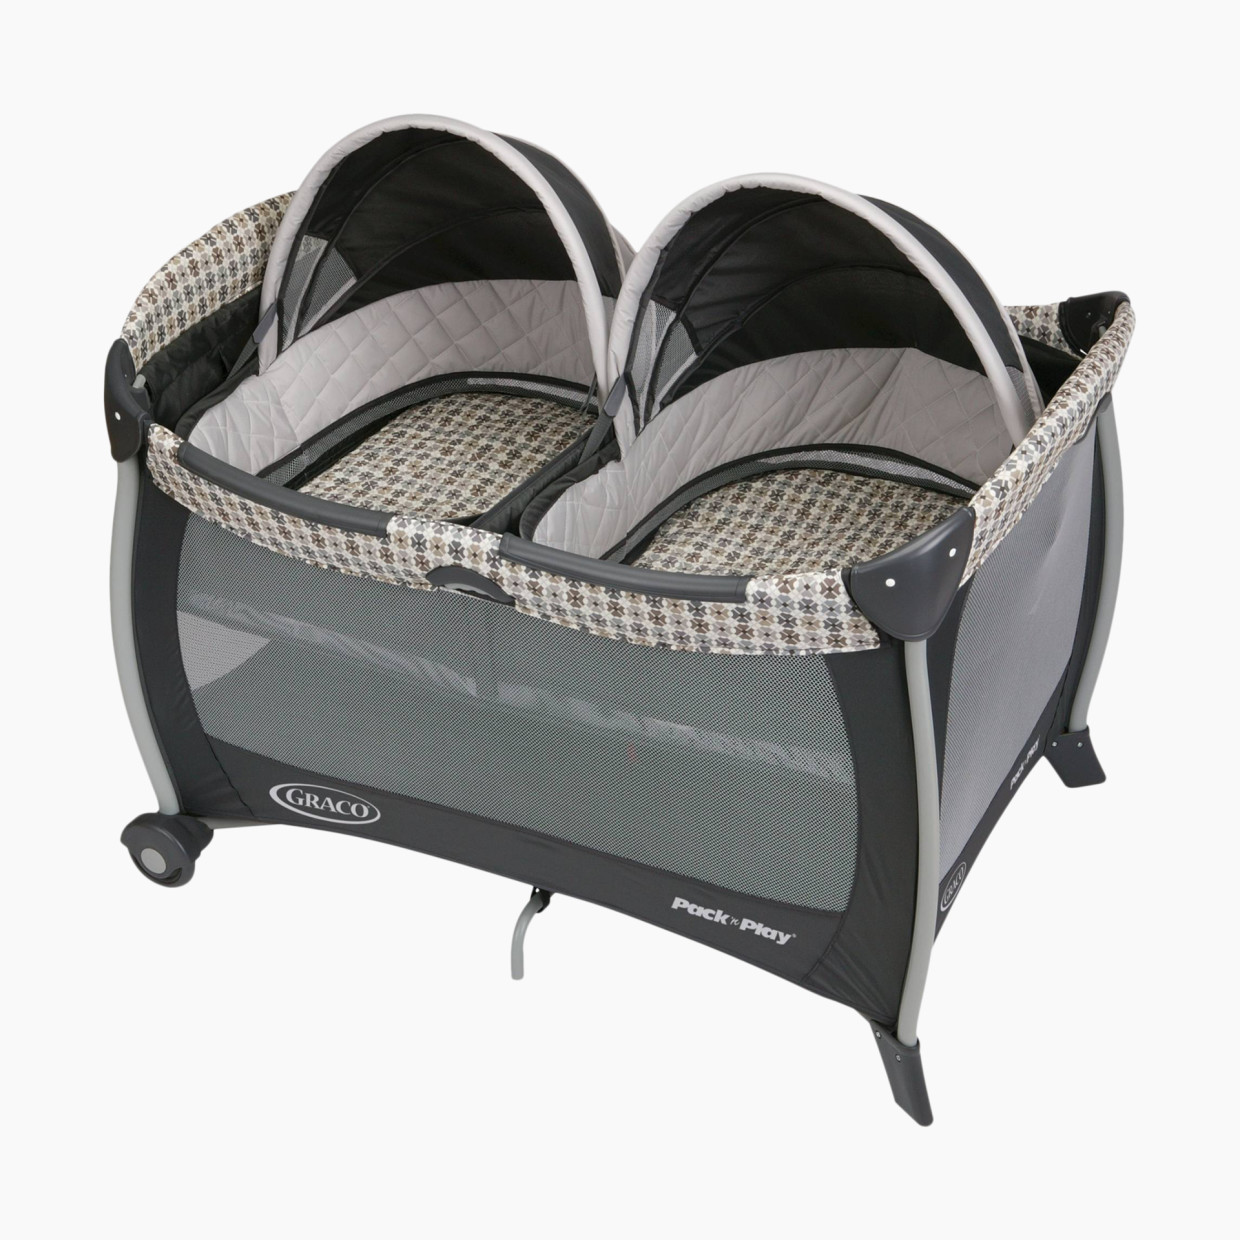 Graco Pack 'n Play Playard with Twins Bassinet.